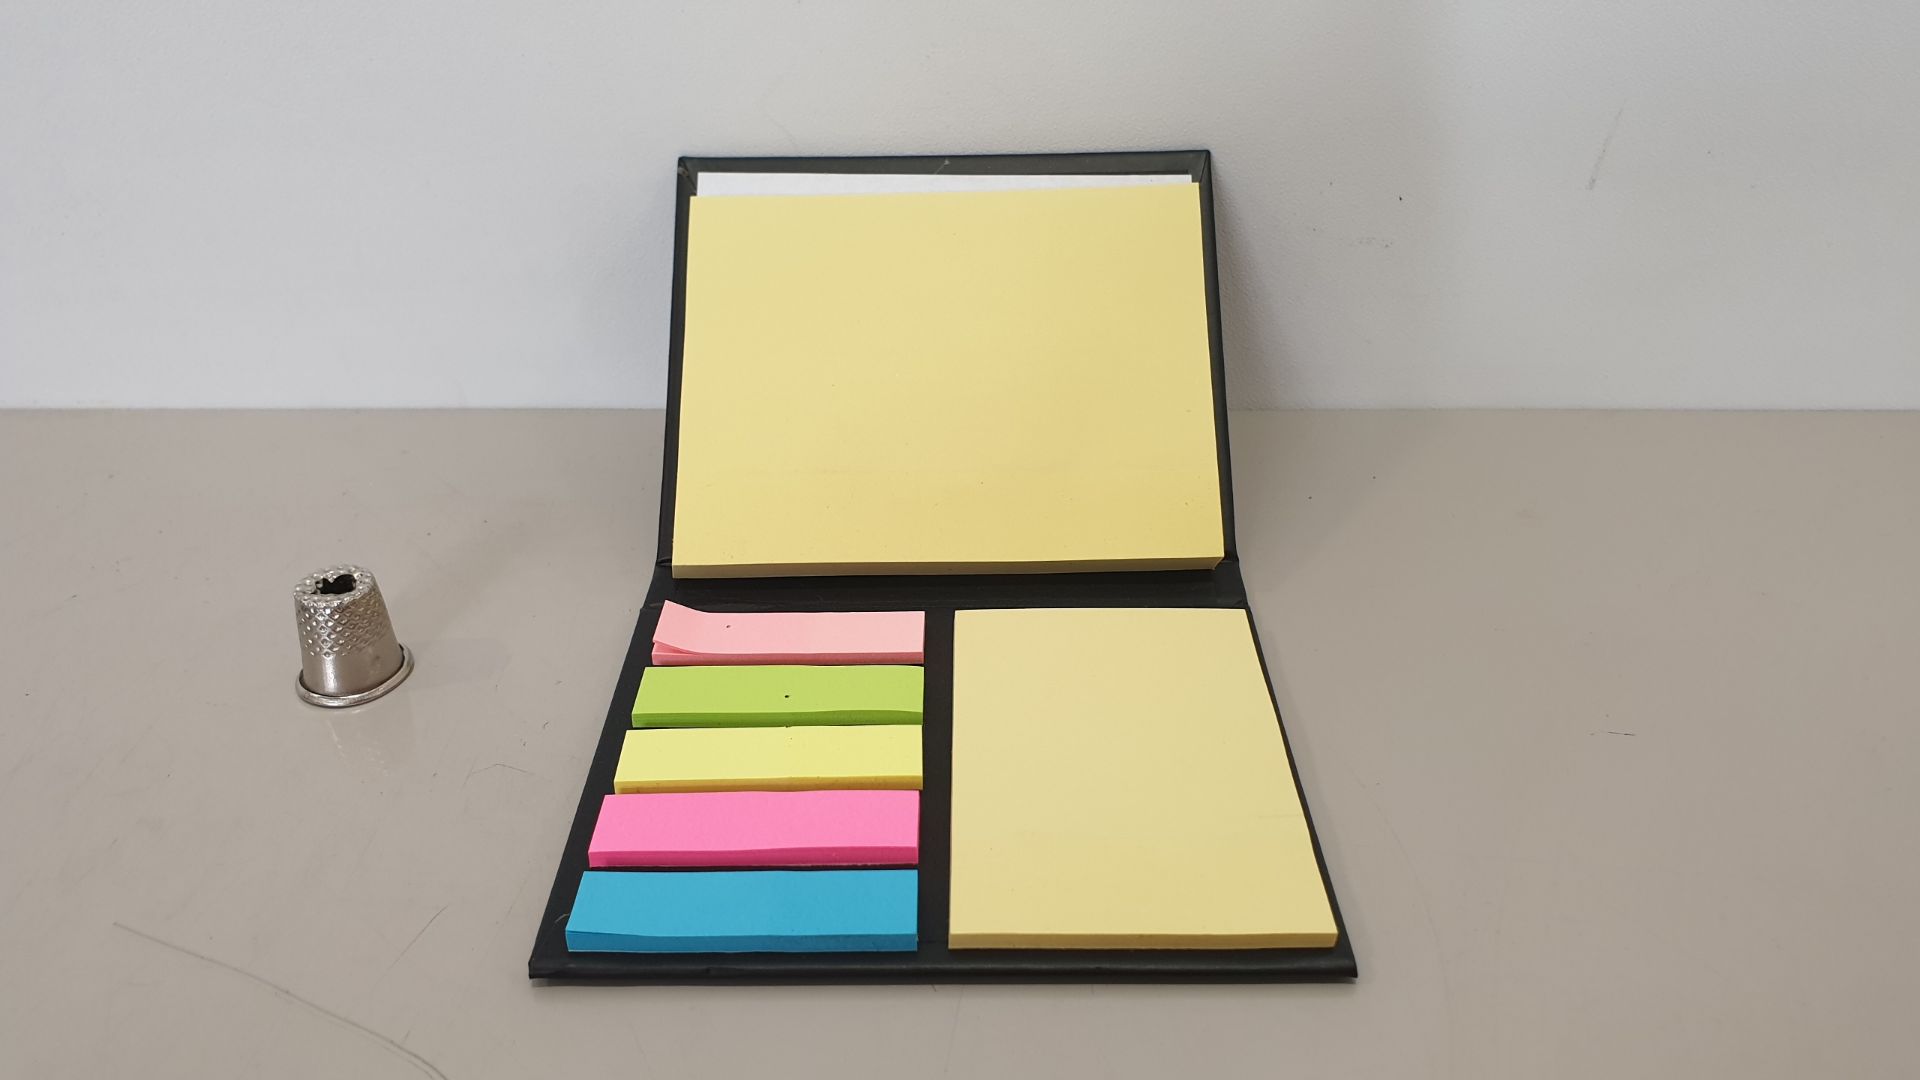 104 X BRAND NEW DESK BUDDY POST IT HOLDERS - WITH 2 YELLOW POST IT STYLE PADS AND 5 COLOURED PAGE